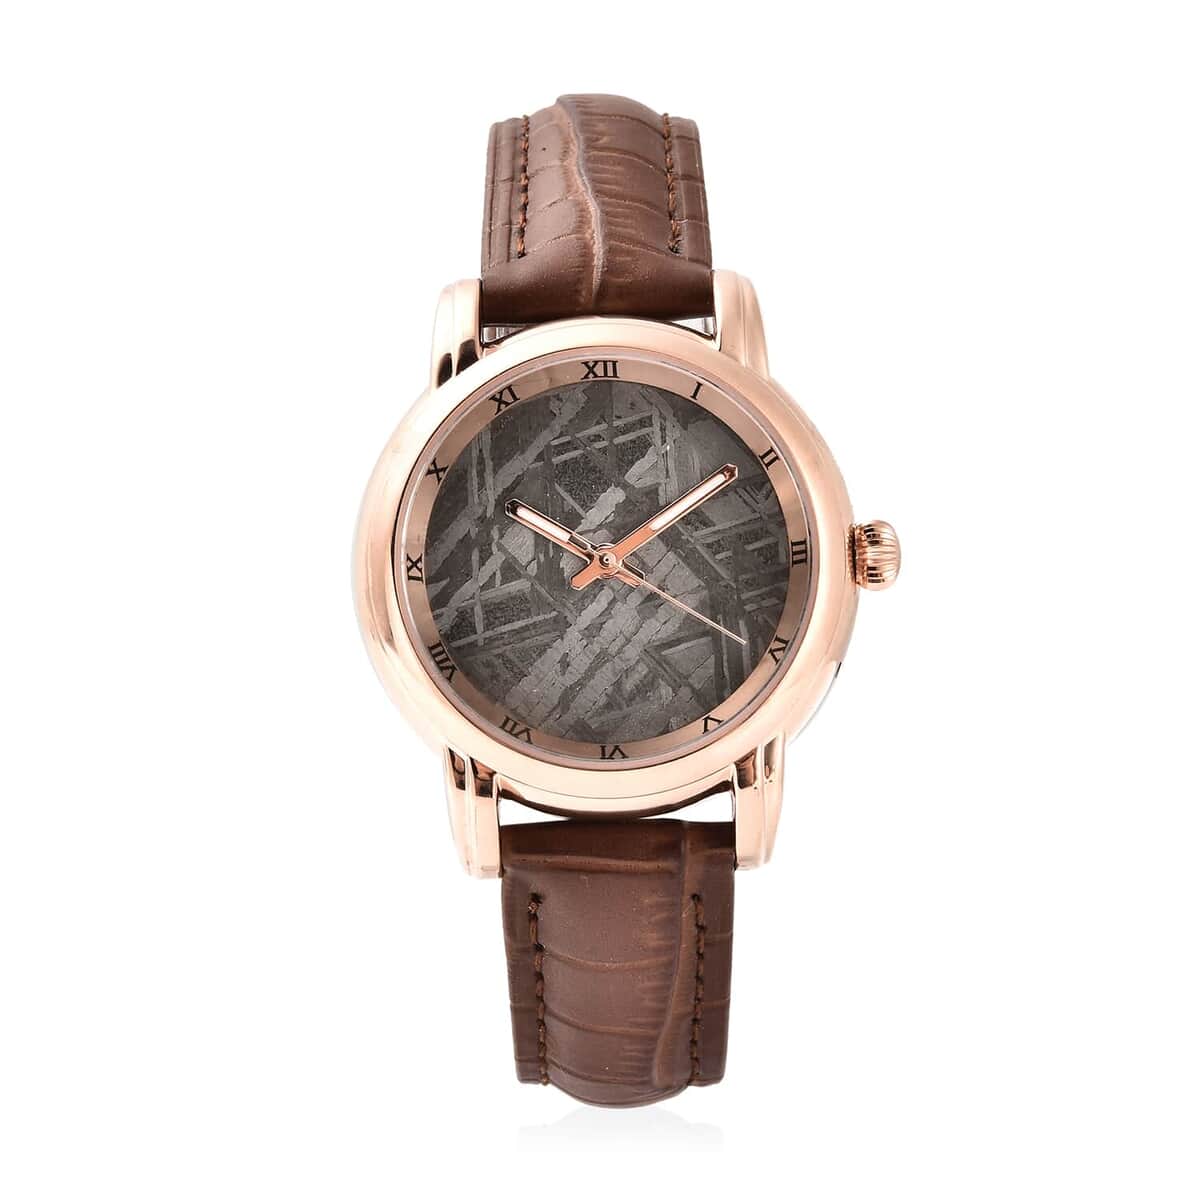 Eon 1962 Swiss Movement Watch with Marvelous Meteorite Dial & Light Brown Leather Strap, Designer Gemstone Watch, Analog Luxury Wristwatch image number 0